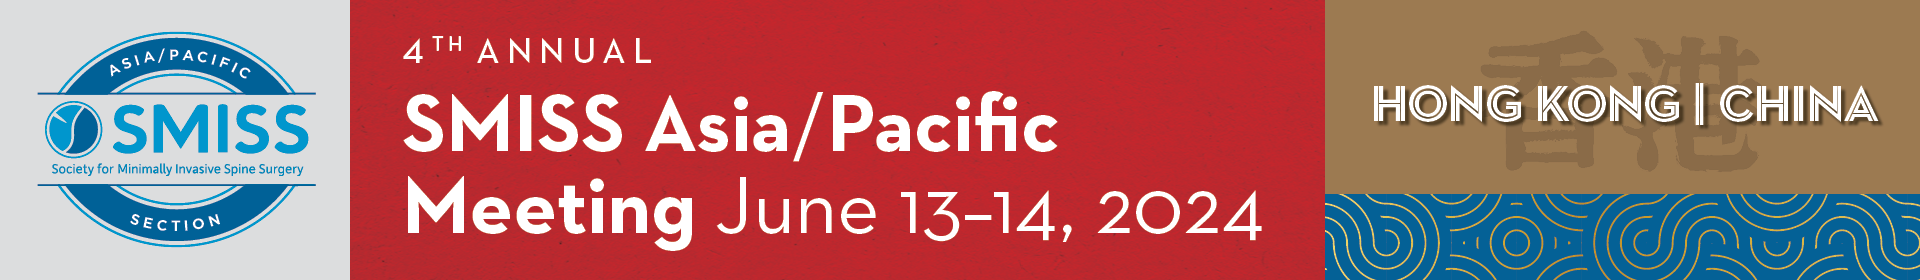 4th Annual SMISS Asia/Pacific Meeting Event Banner